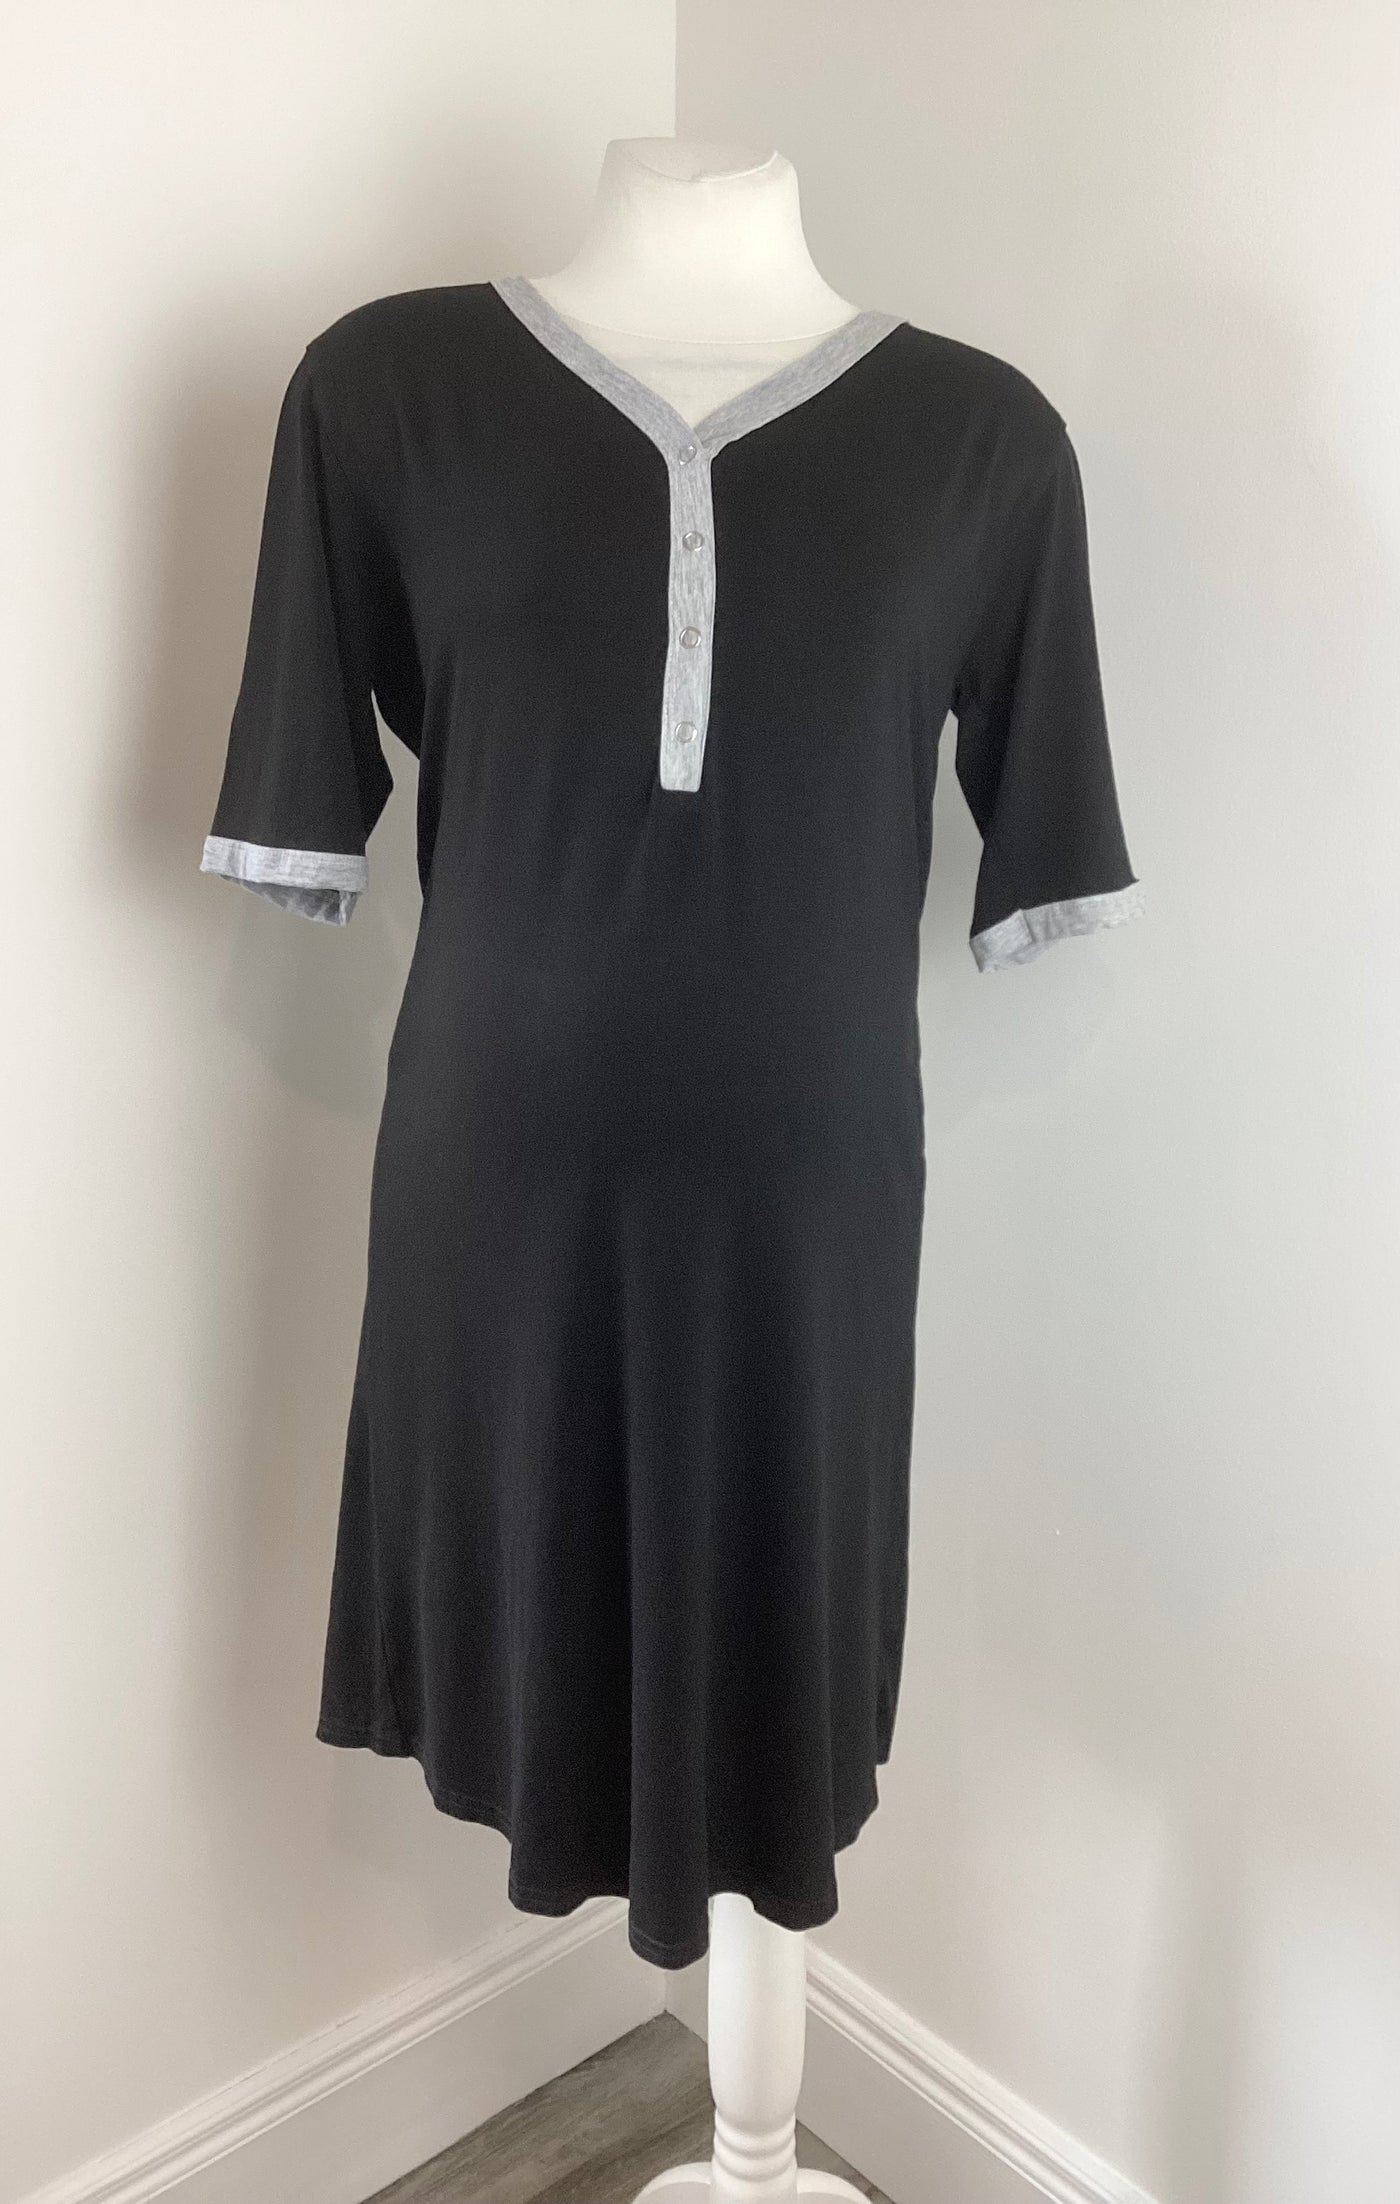 Black & grey trim maternity & nursing nightdress with front & back poppers (no label) - Size 12